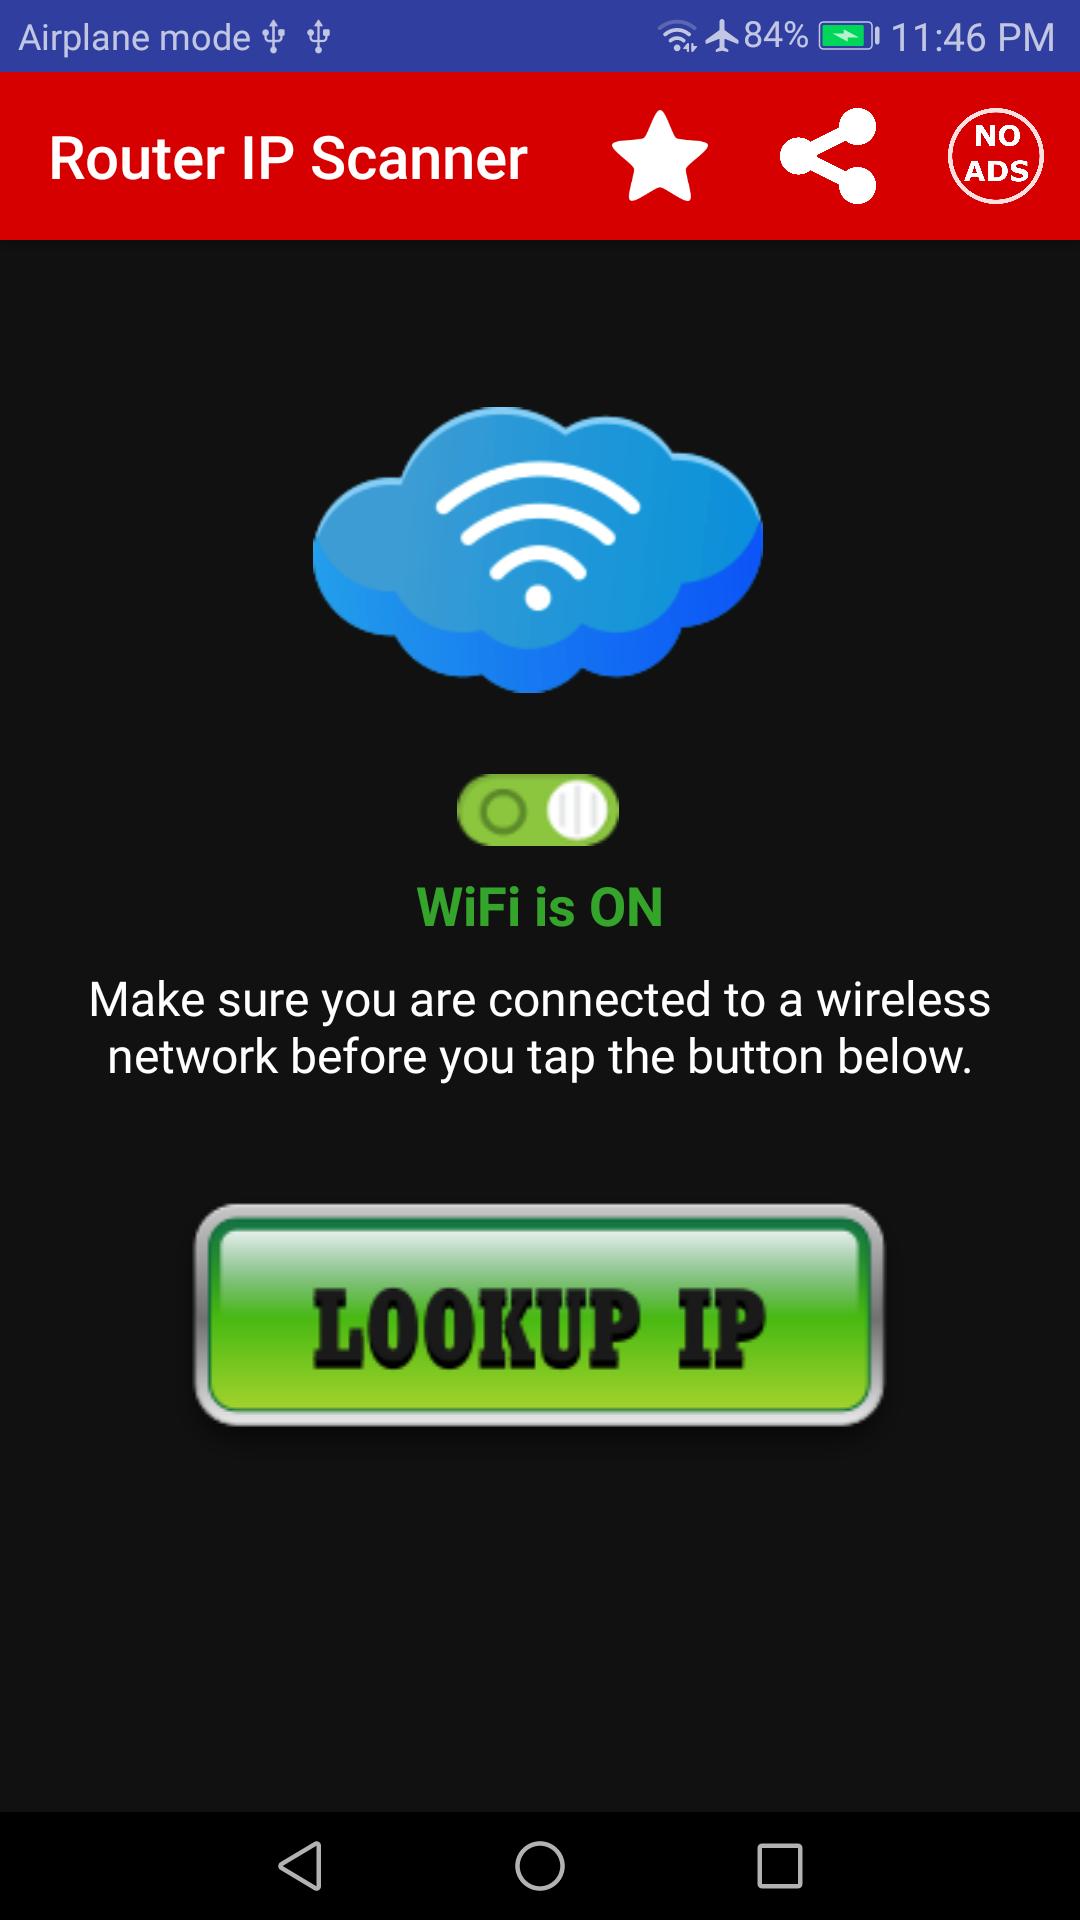 Router IP Scanner for Android - APK Download